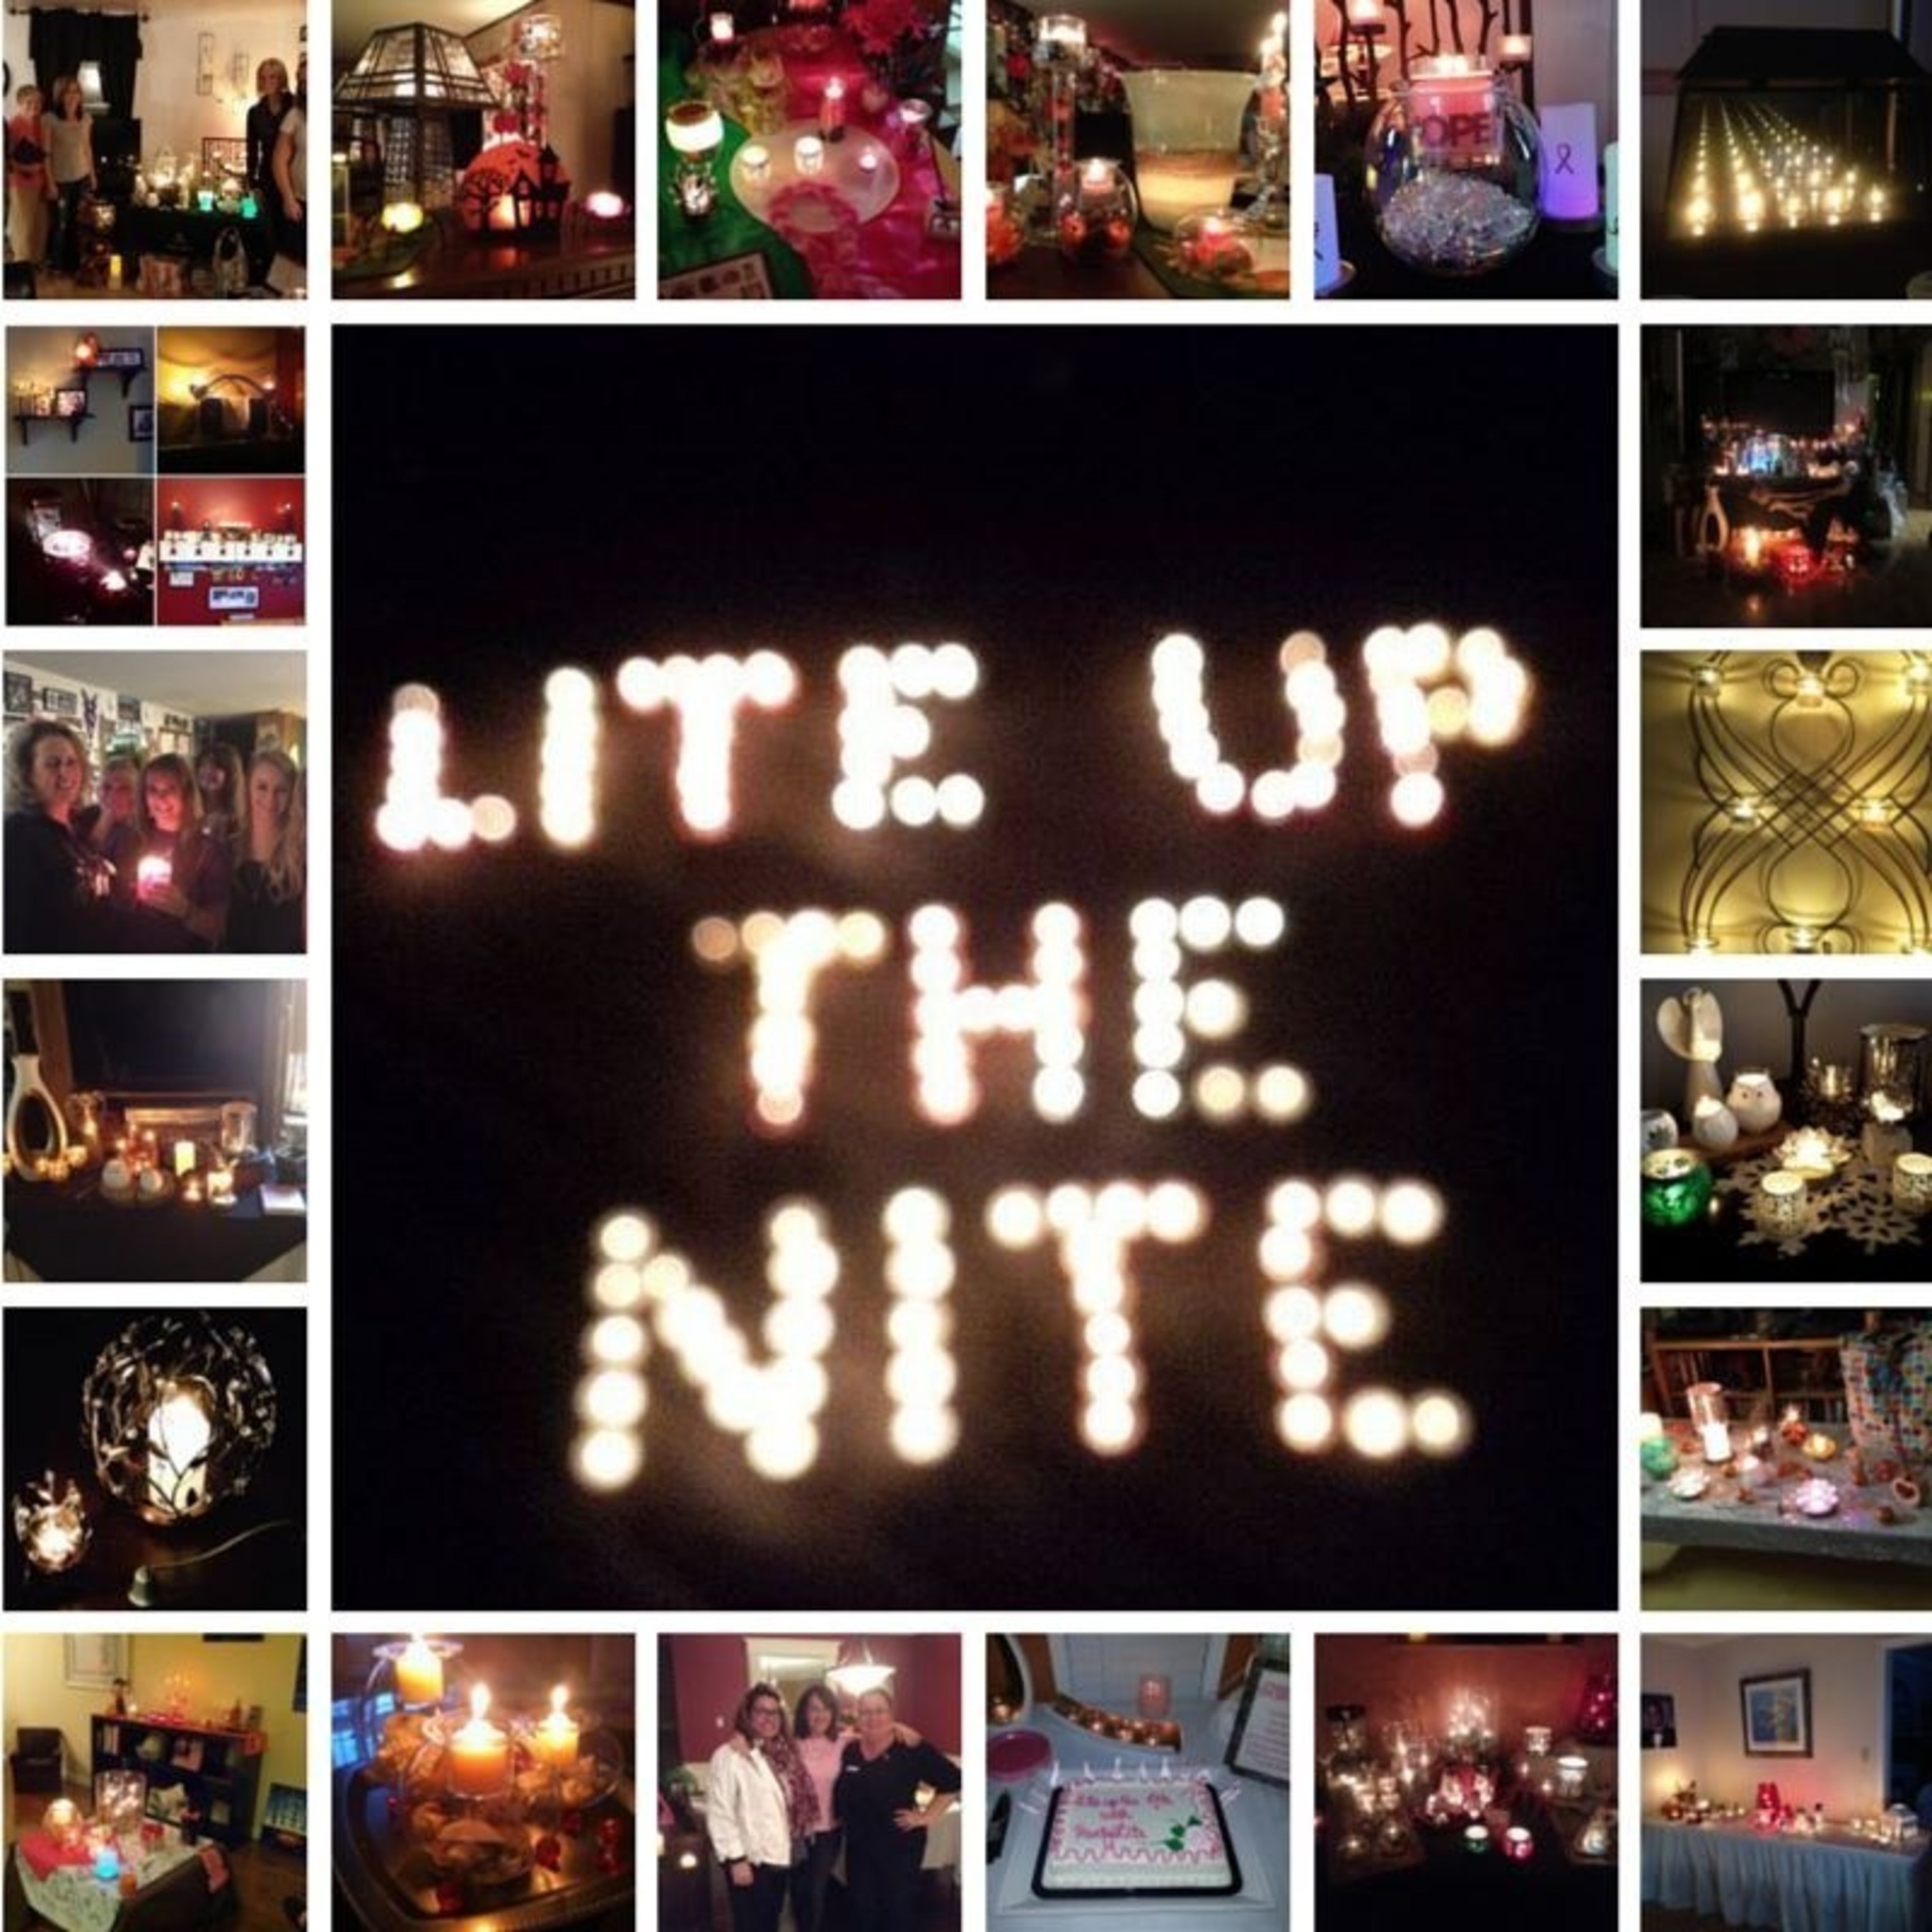 PartyLite's "Lite Up the Nite" fundraiser rallied people to raise money for breast cancer awareness